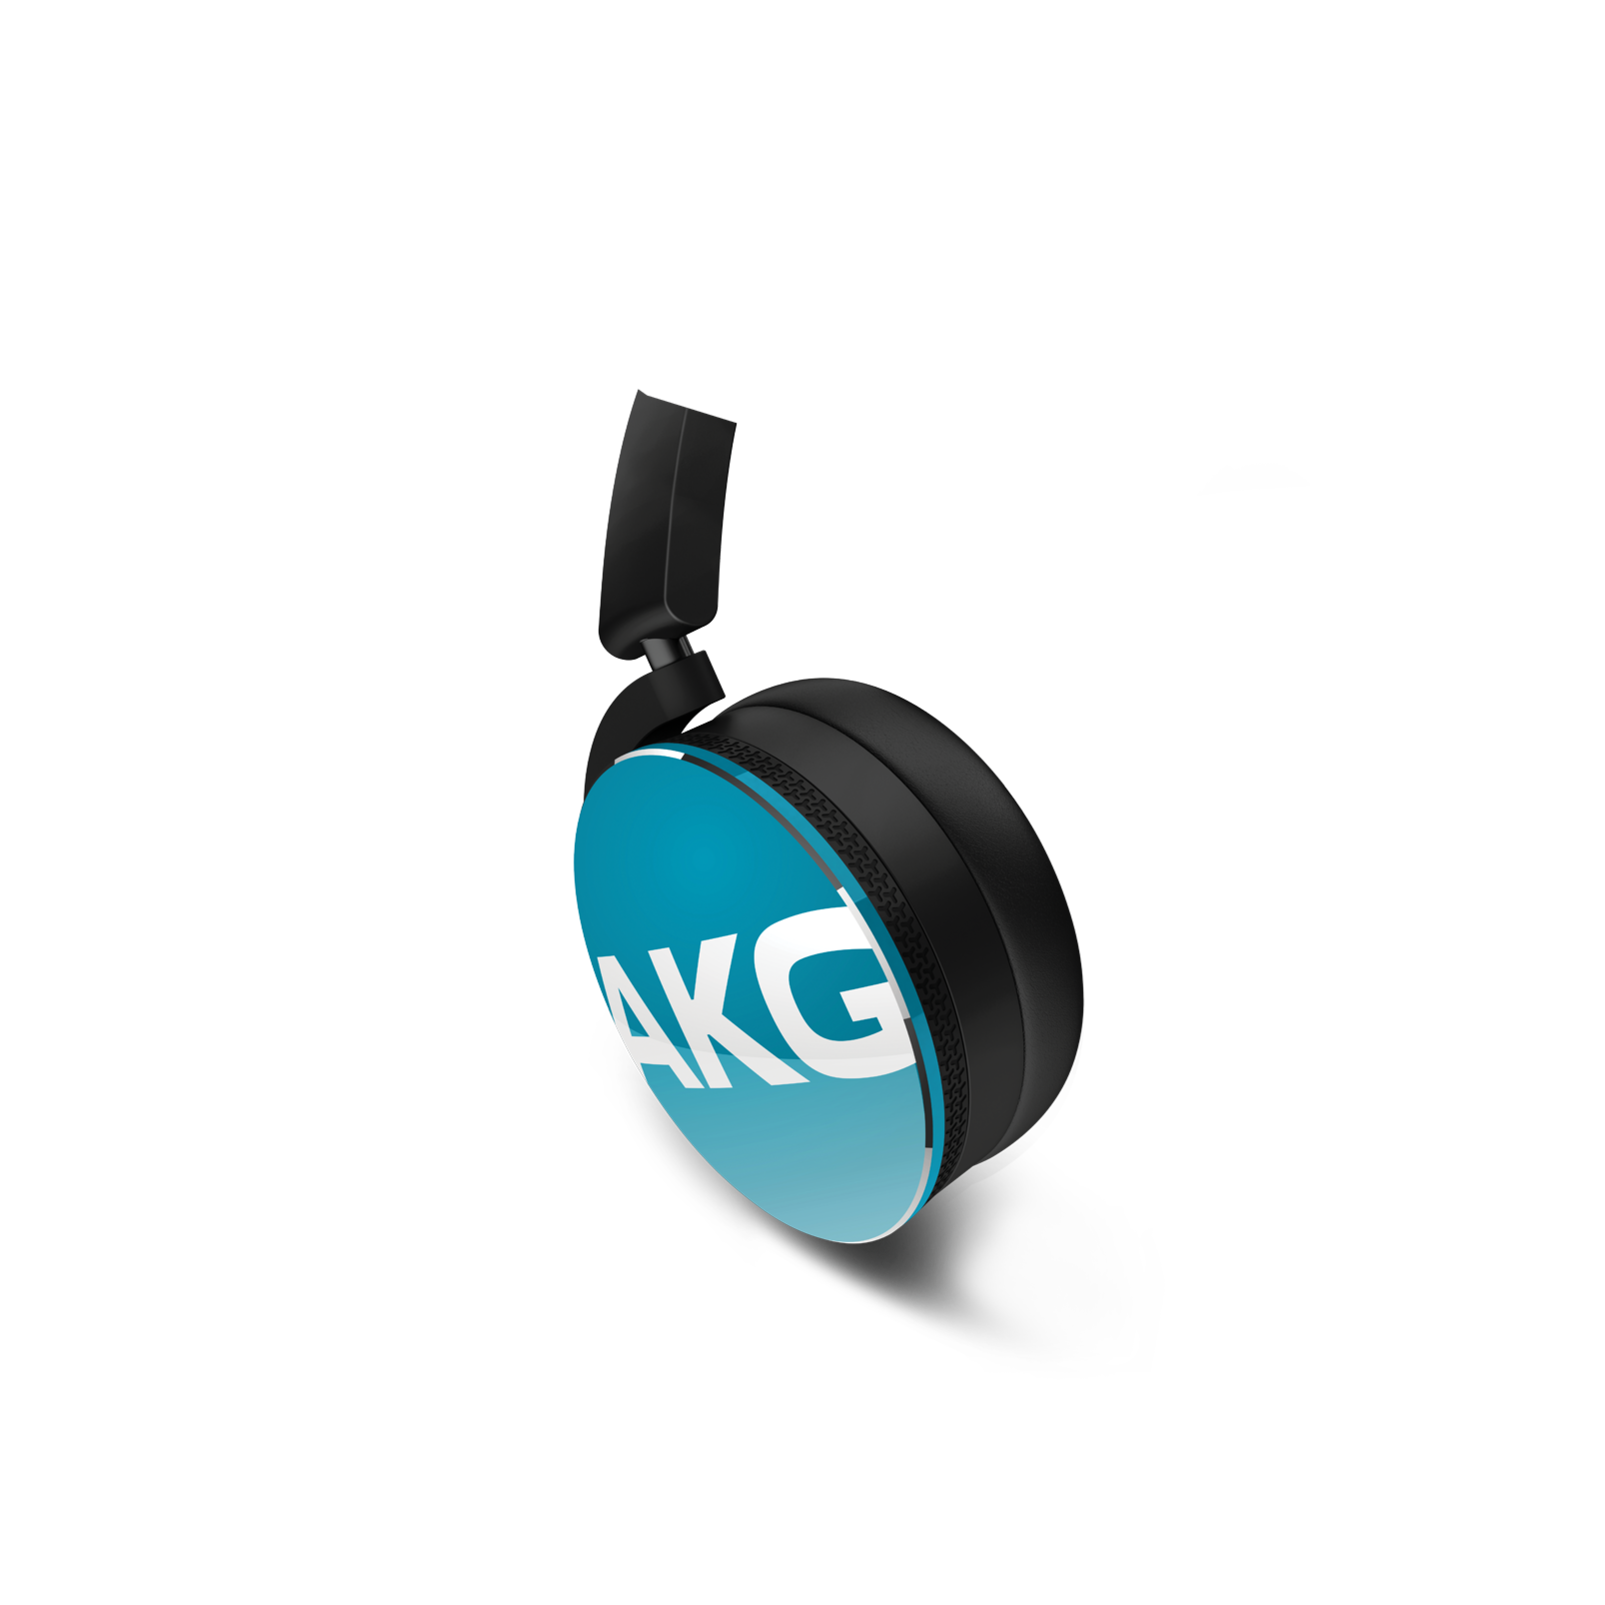 Y50 - Blue - On-ear headphones with AKG-quality sound, smart styling, snug fit and detachable cable with in-line remote/mic - Detailshot 1